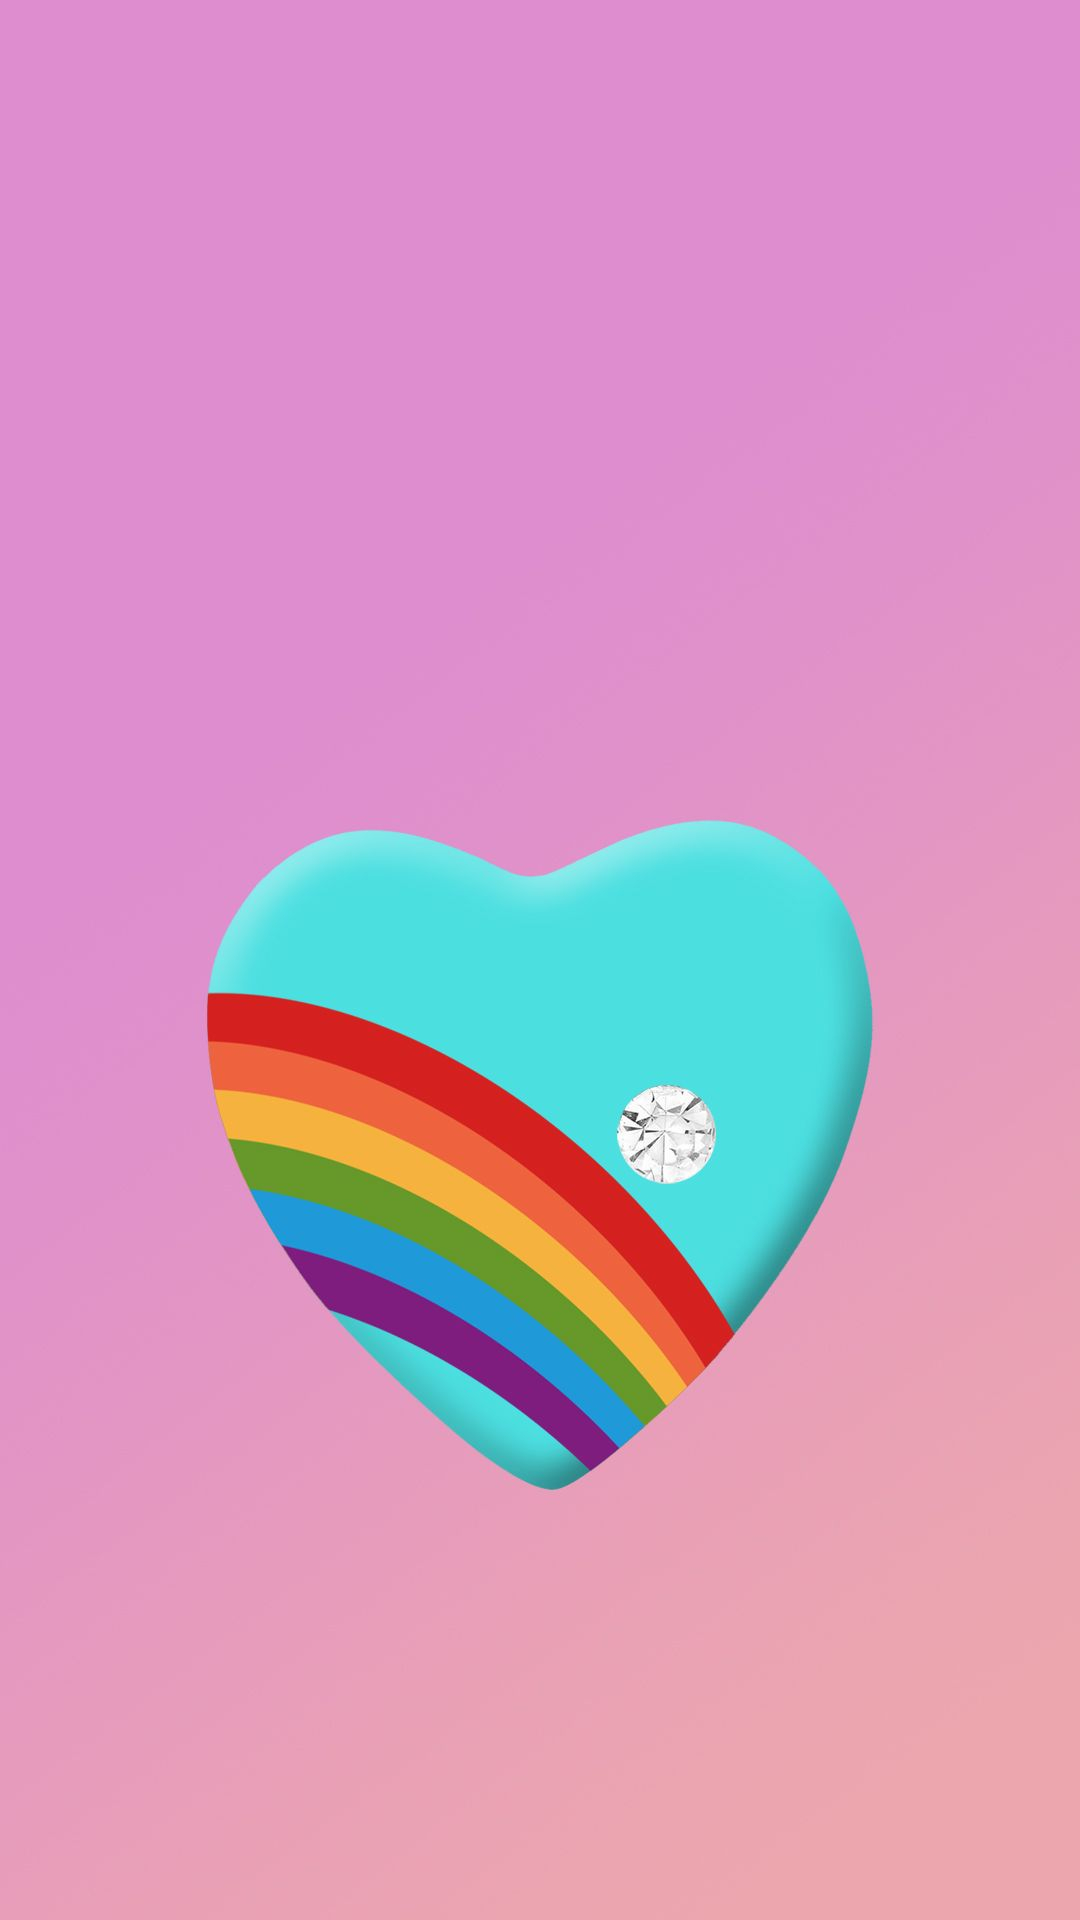 1080x1920 Pastel Rainbow Heart Wallpapers Top Free Pastel Rainbow Heart Backgrounds